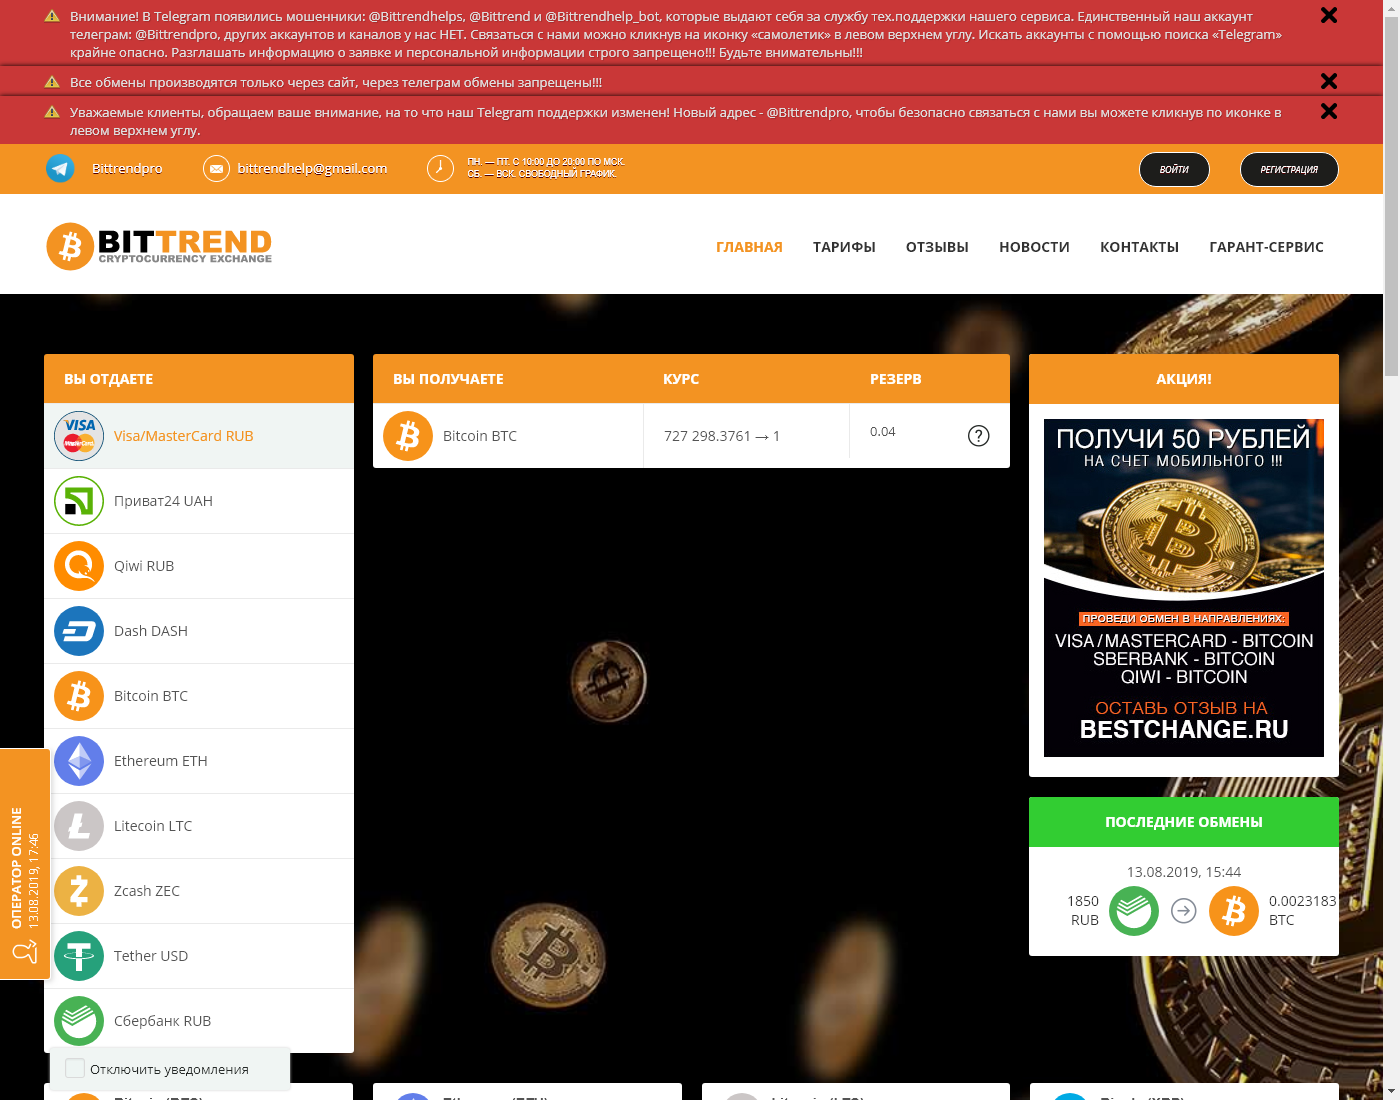 BitTrend user interface: the home page in English